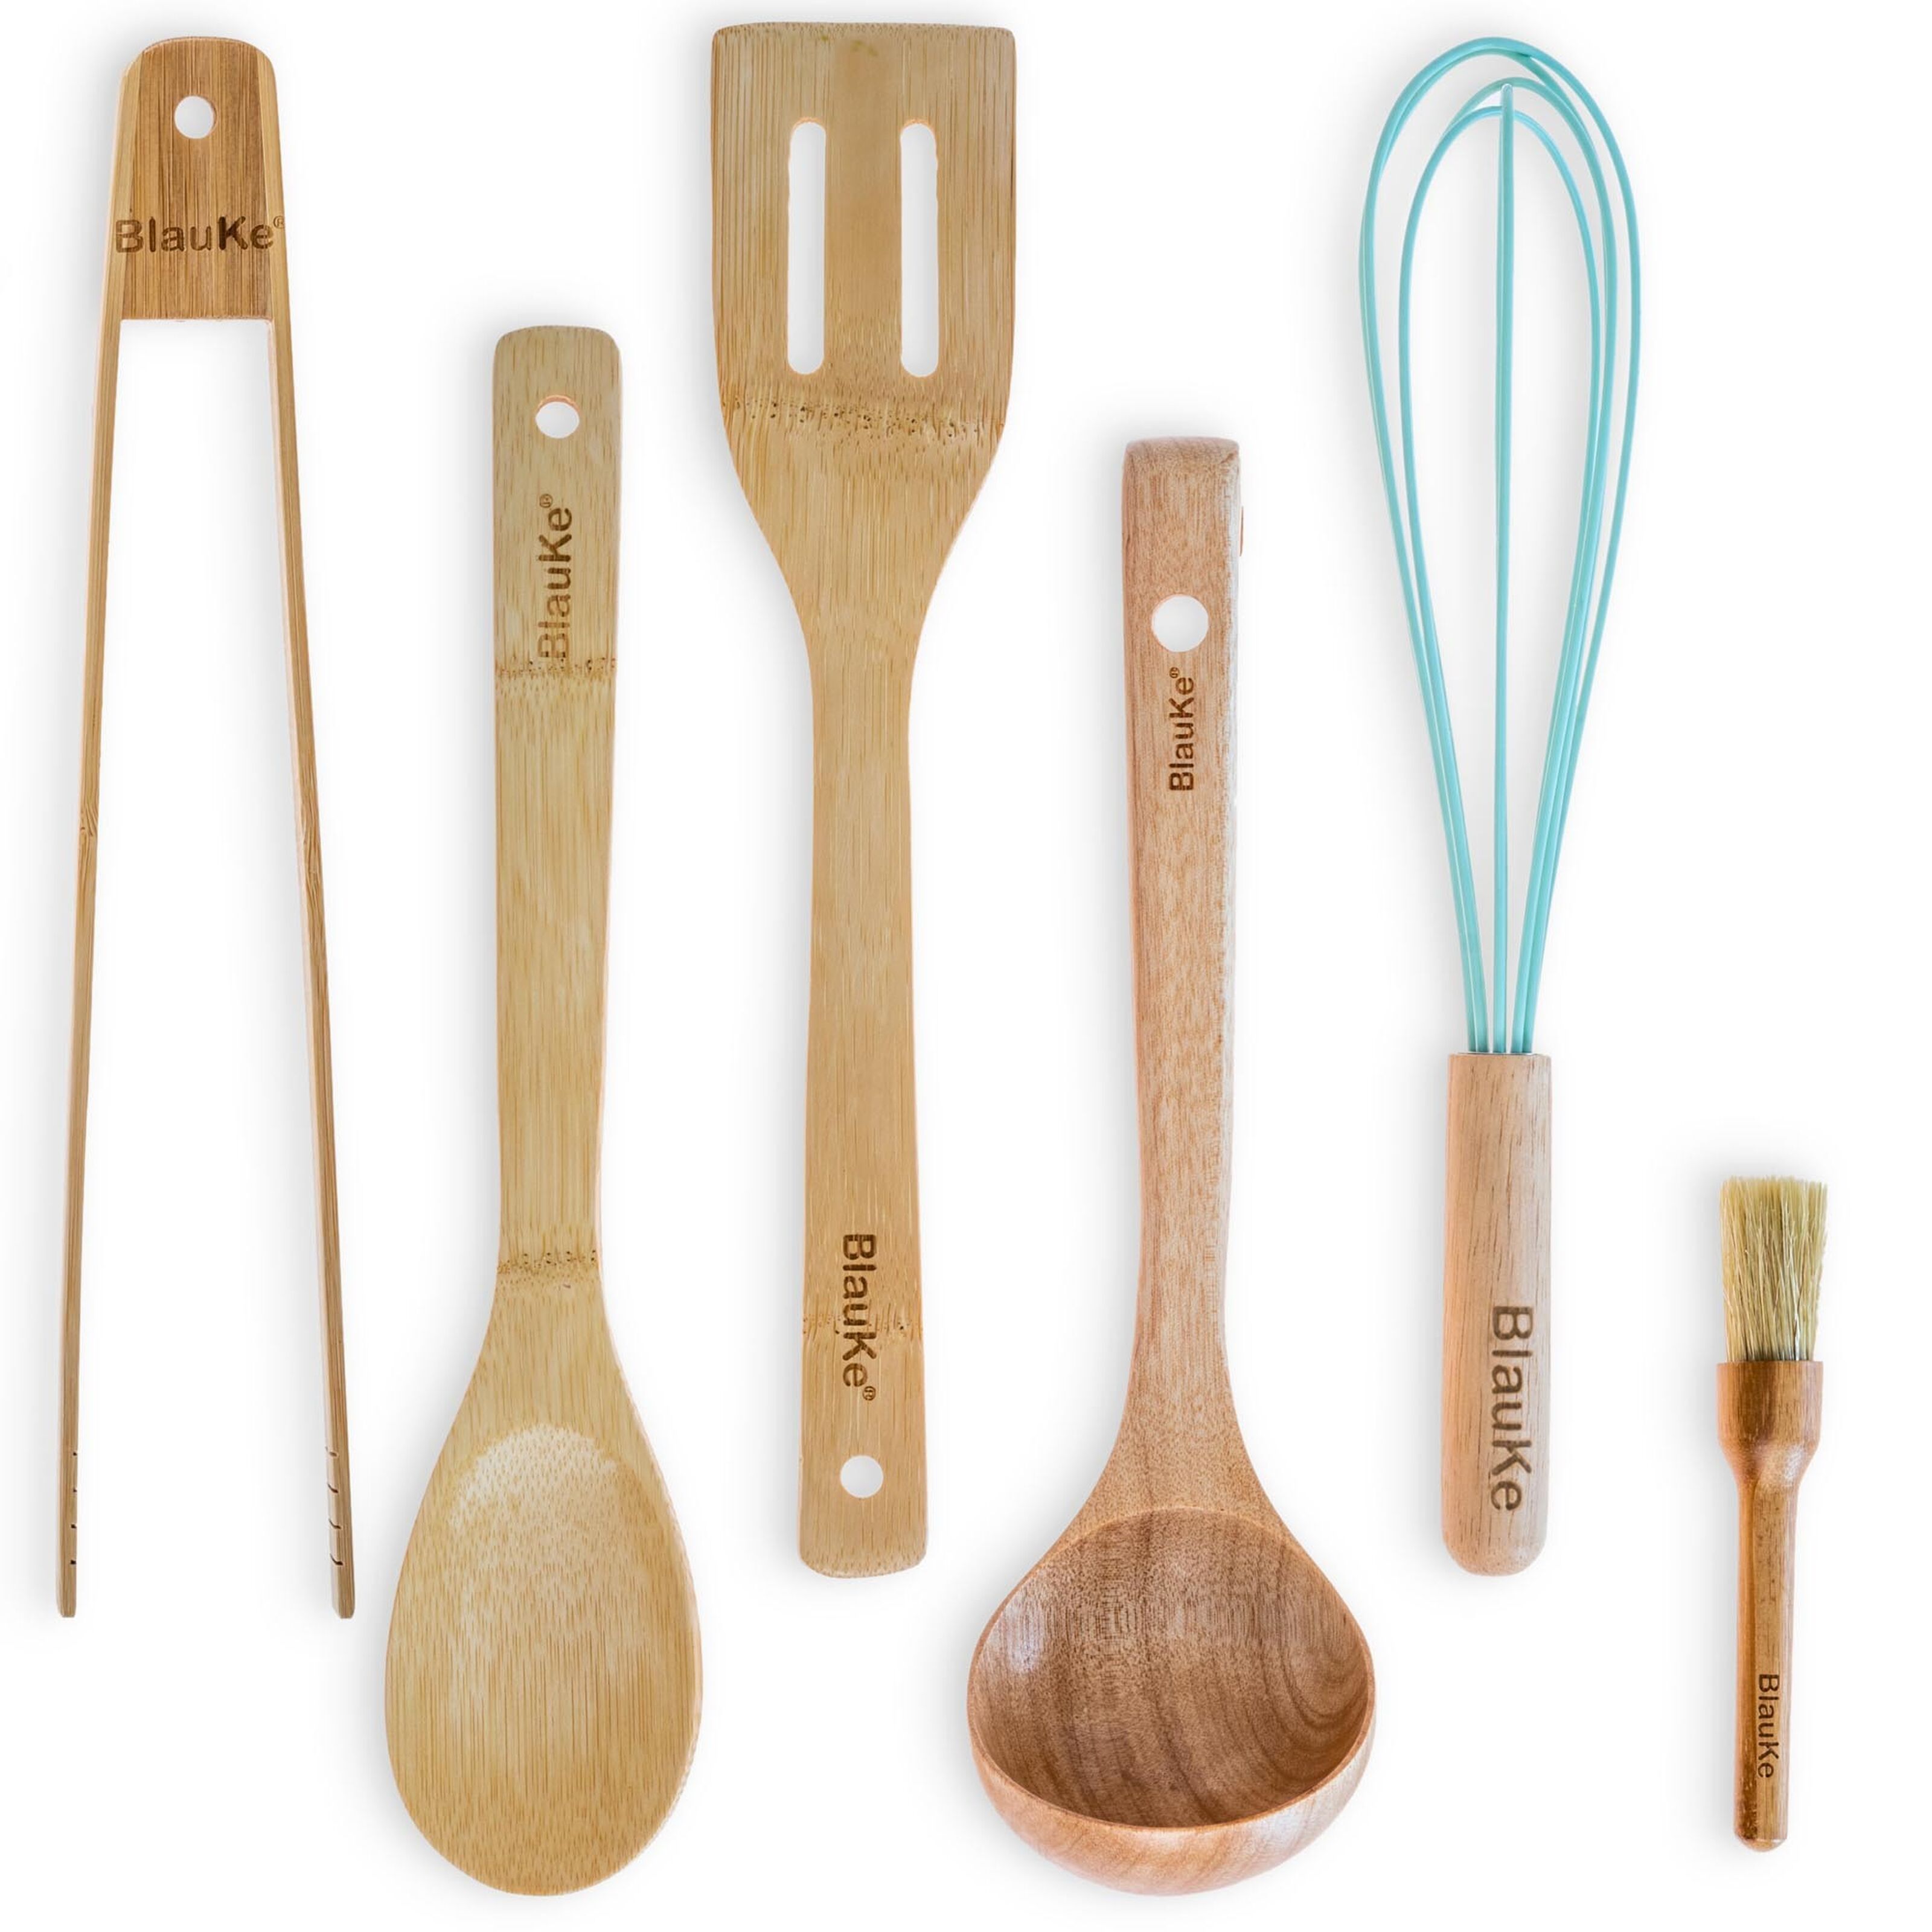 What Are The Best Kitchen Utensils: Wood, Bamboo, Or Silicone? - bambu